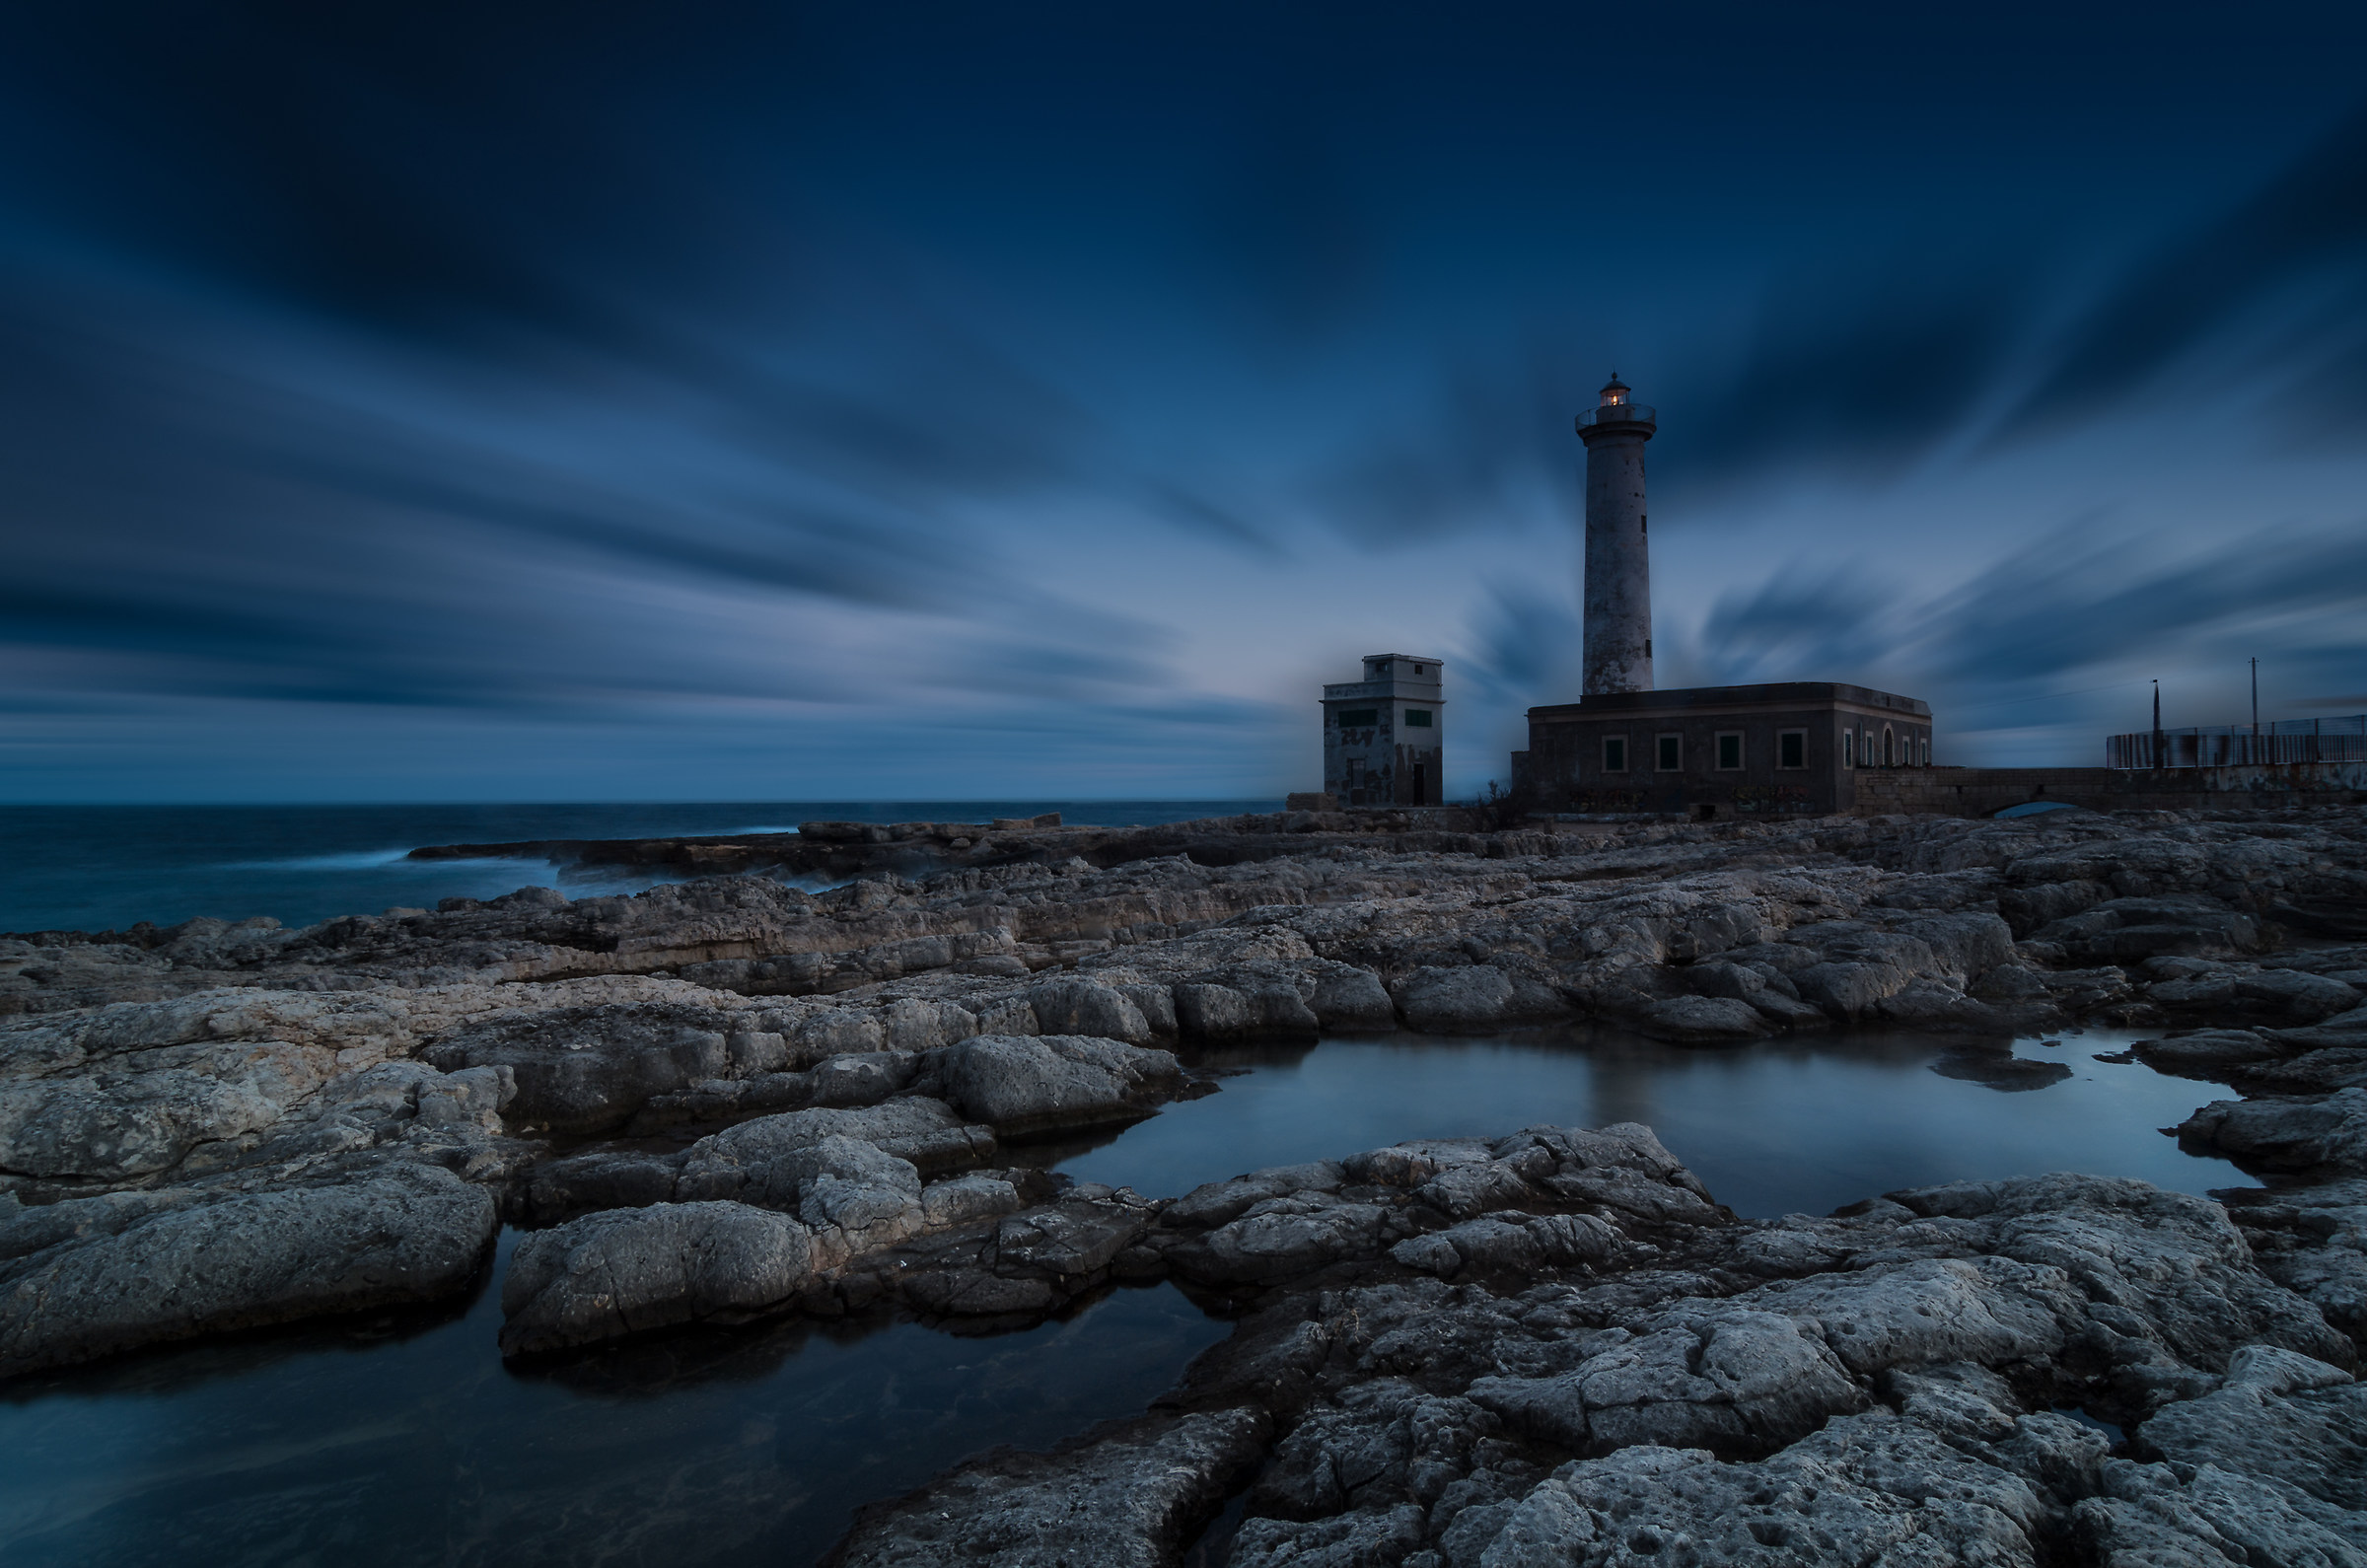 The lighthouse in blue...